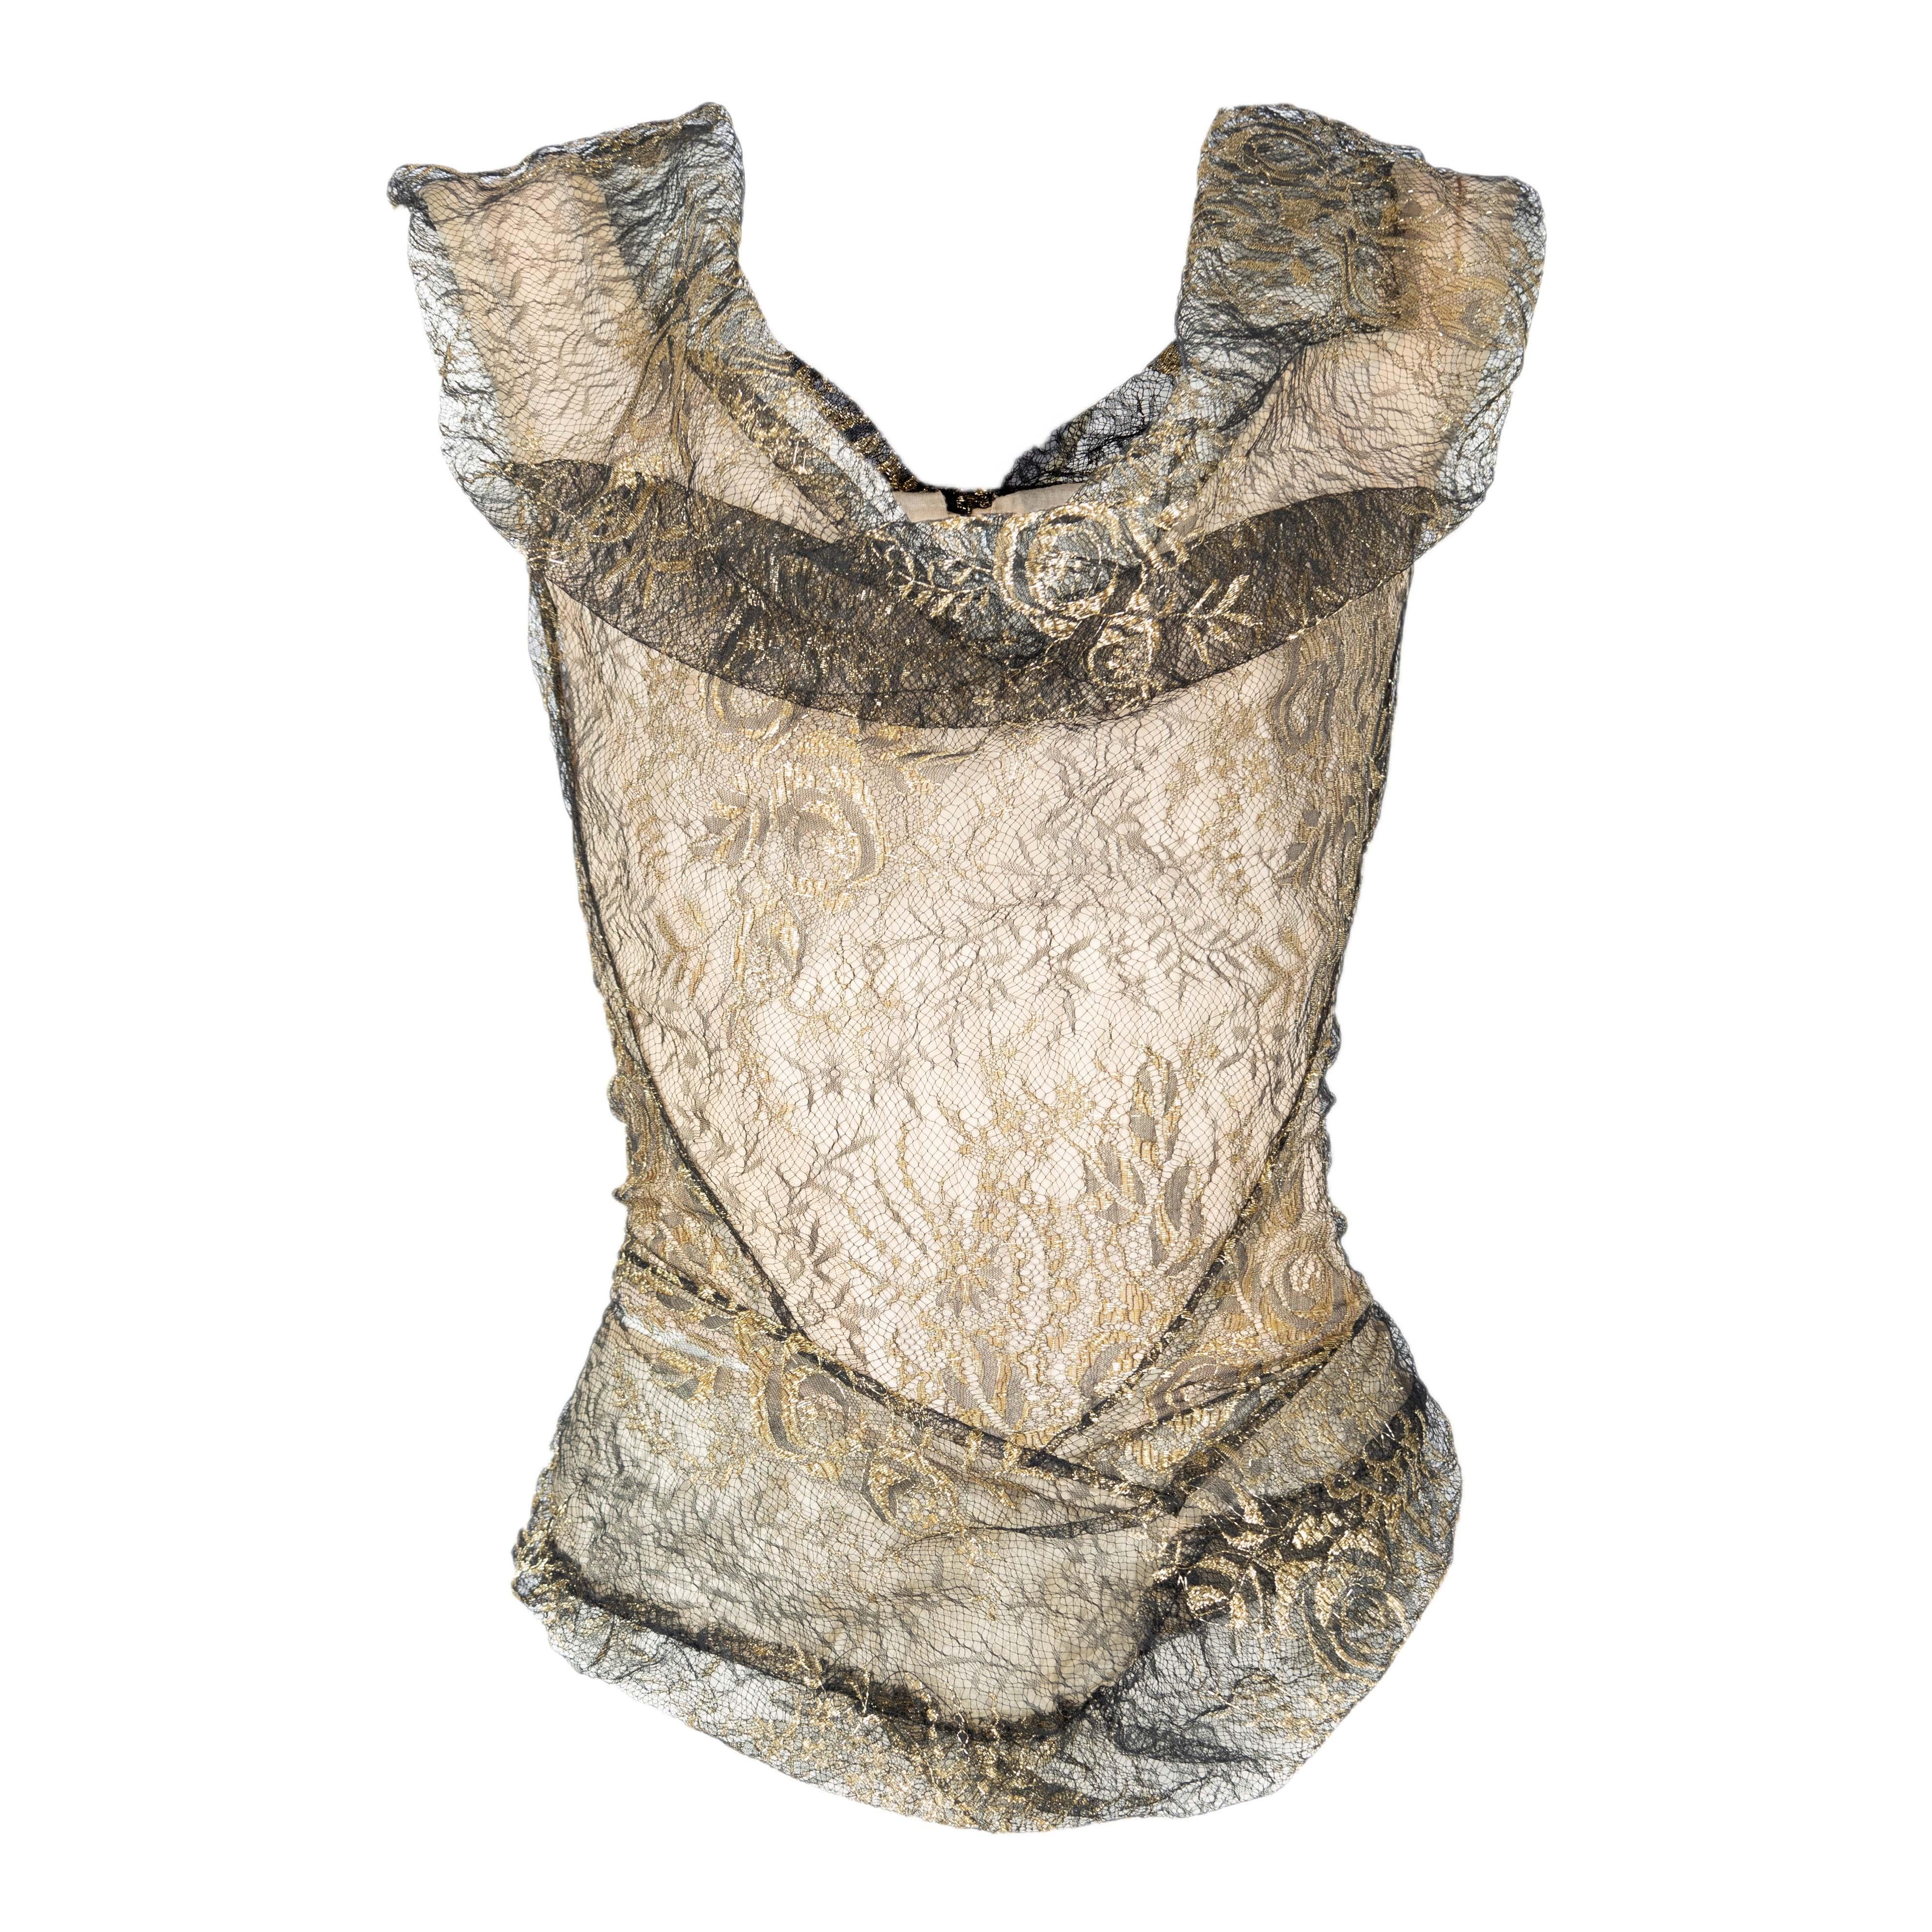 Vivienne Westwood Lace Corset from 2002 Nymphs Collection. It is a rare and unique piece with a tight-fitting silhouette that flares out slightly at the hips. The lace gathering on the front falls to give an accentuated look around the neckline. The